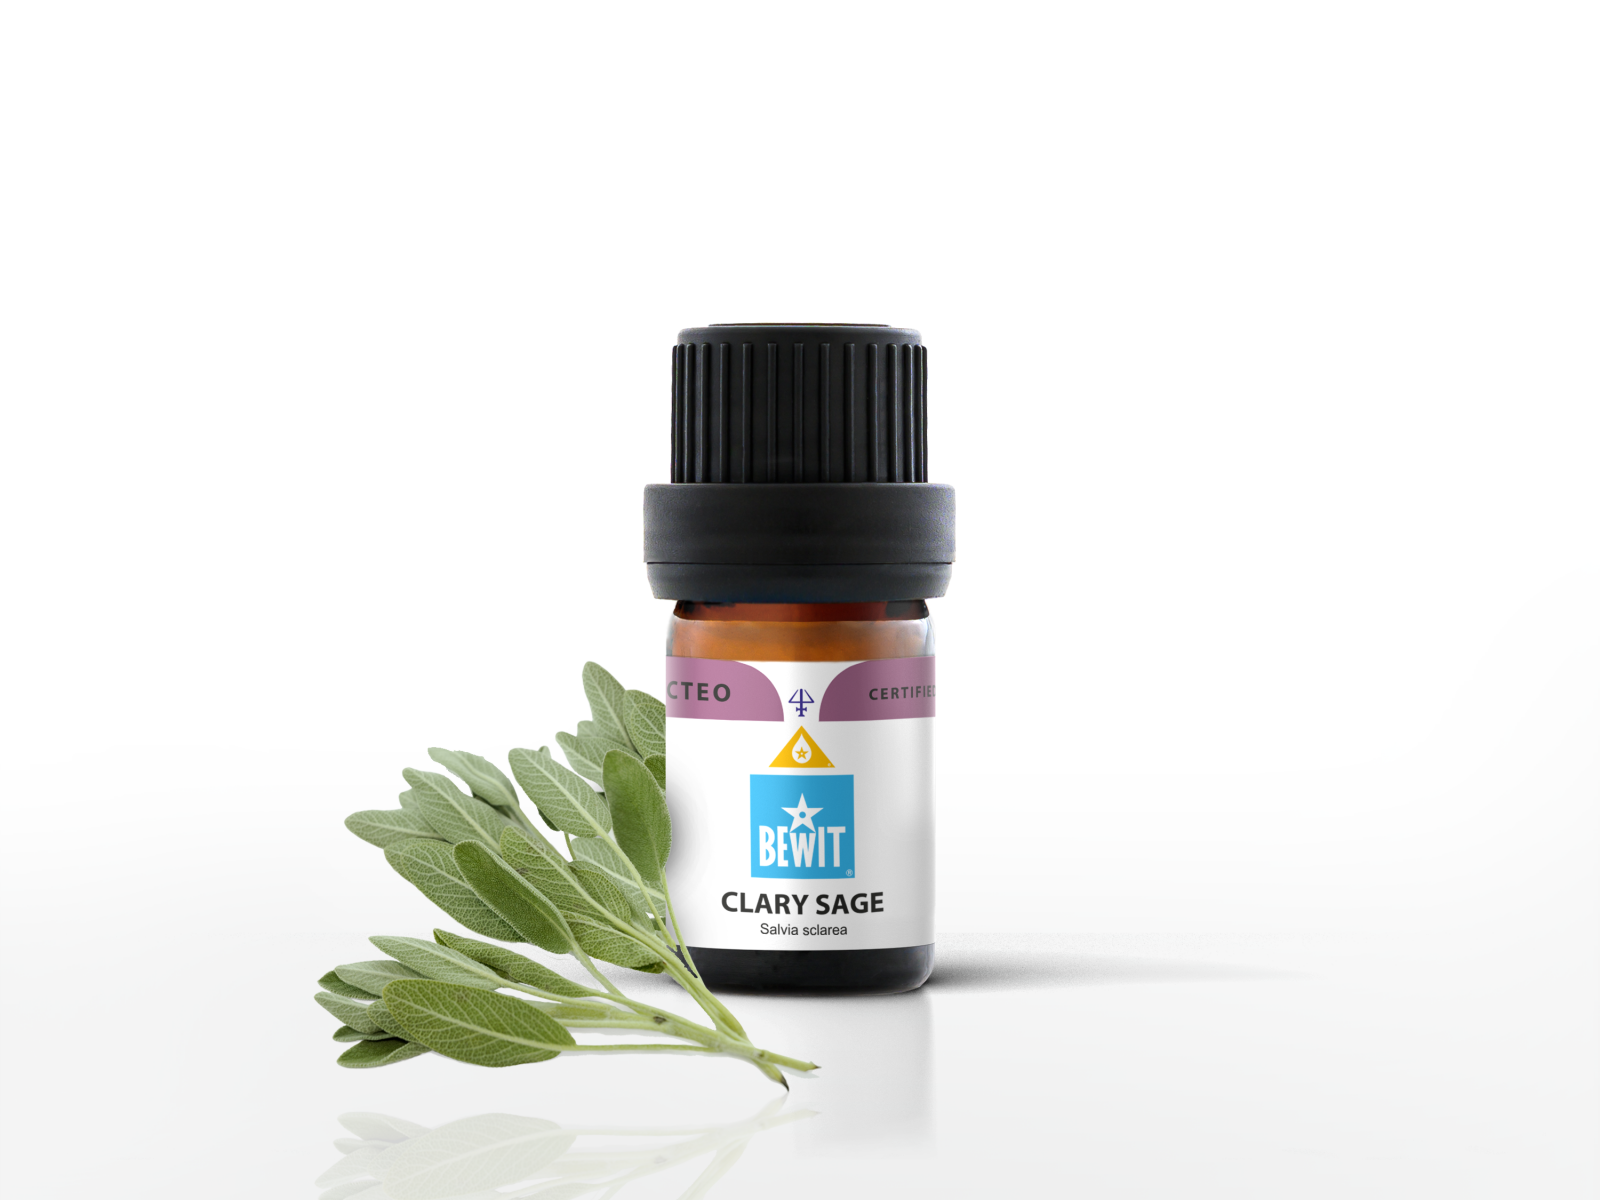 BEWIT Clary sage - It is a 100% pure essential oil - 2